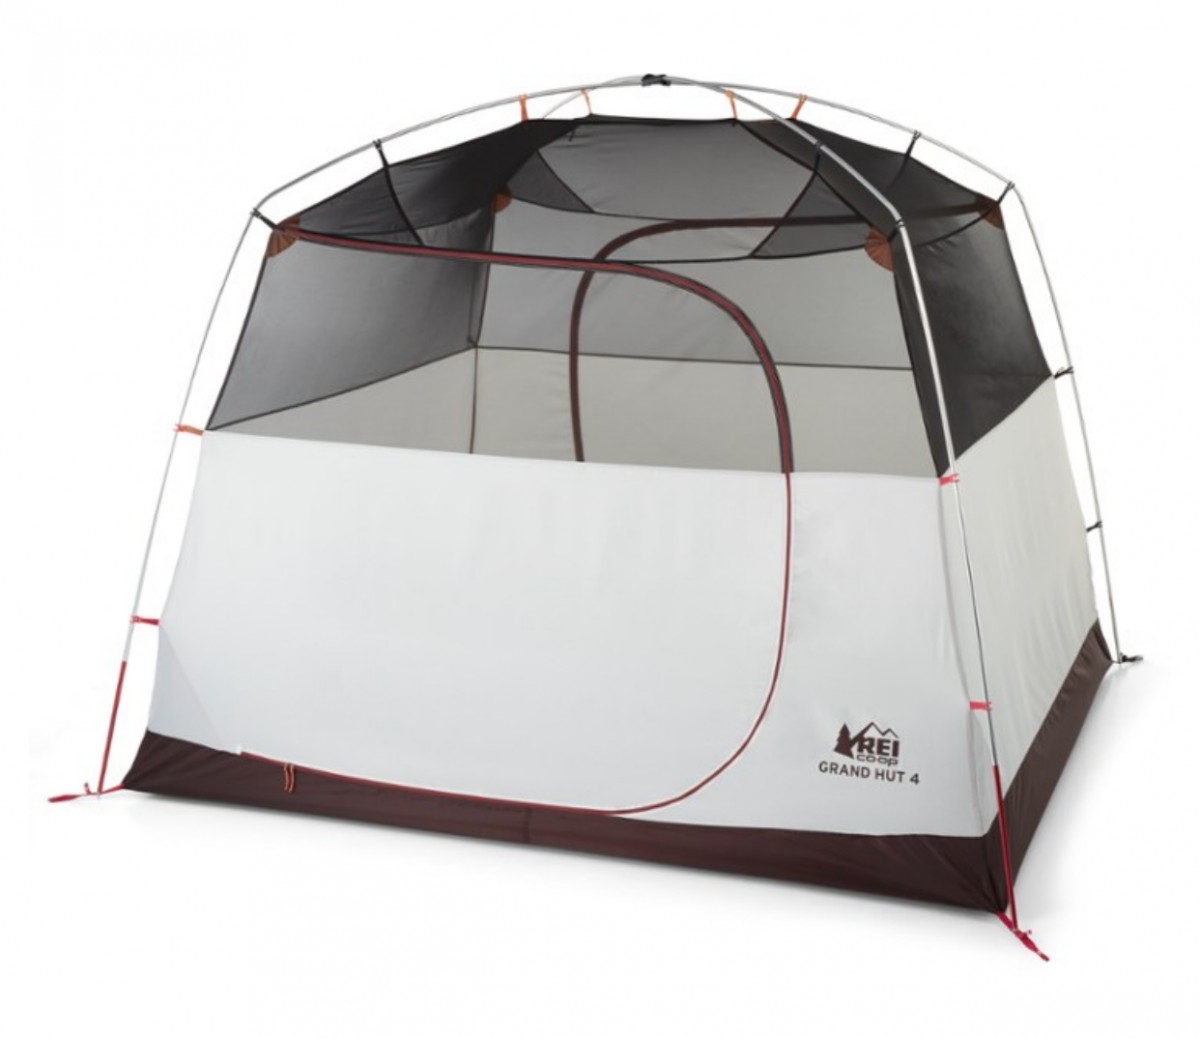 rei co-op grand hut 4 camping tent review